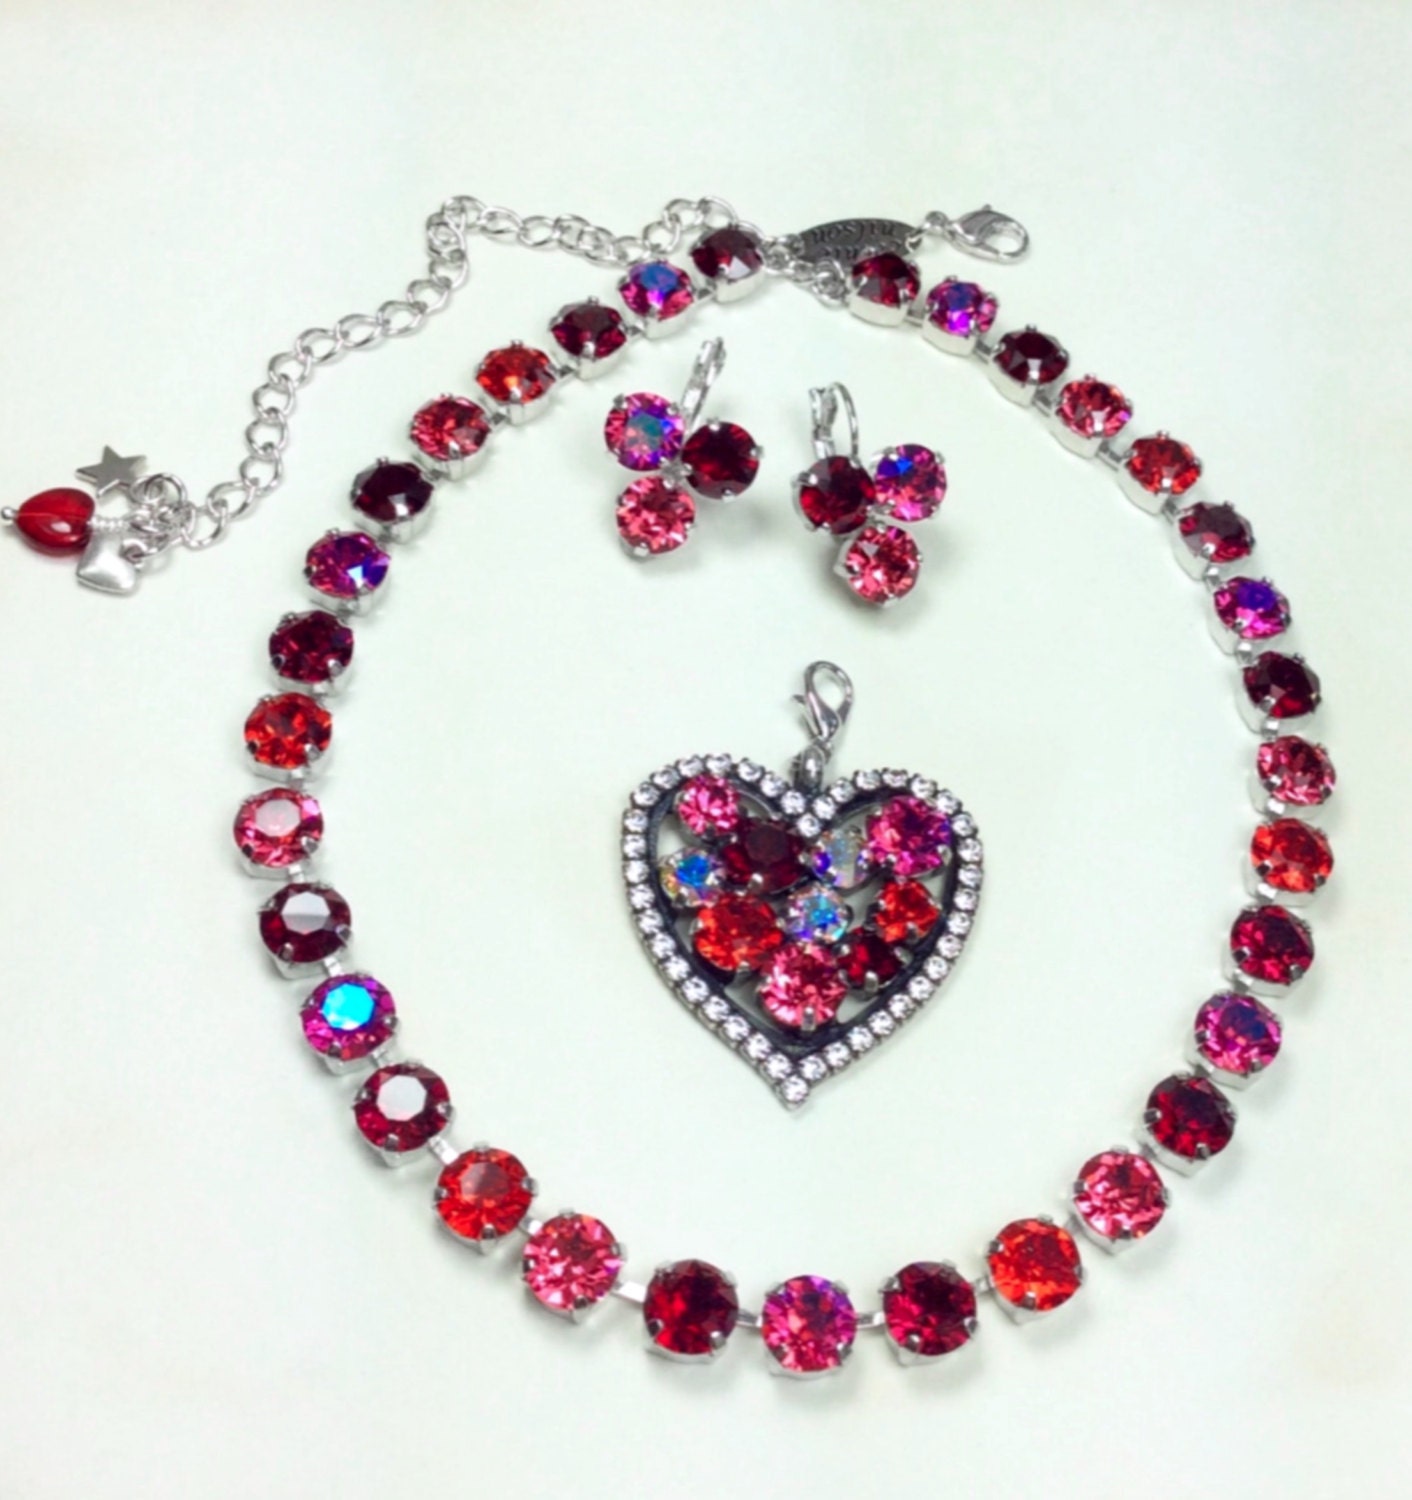 Swarovski Crystal 8.5mm Necklace & Heart - Vibrant and Romantic  "Valentine's Day Reds"  - Designer Inspired - FREE SHIPPING